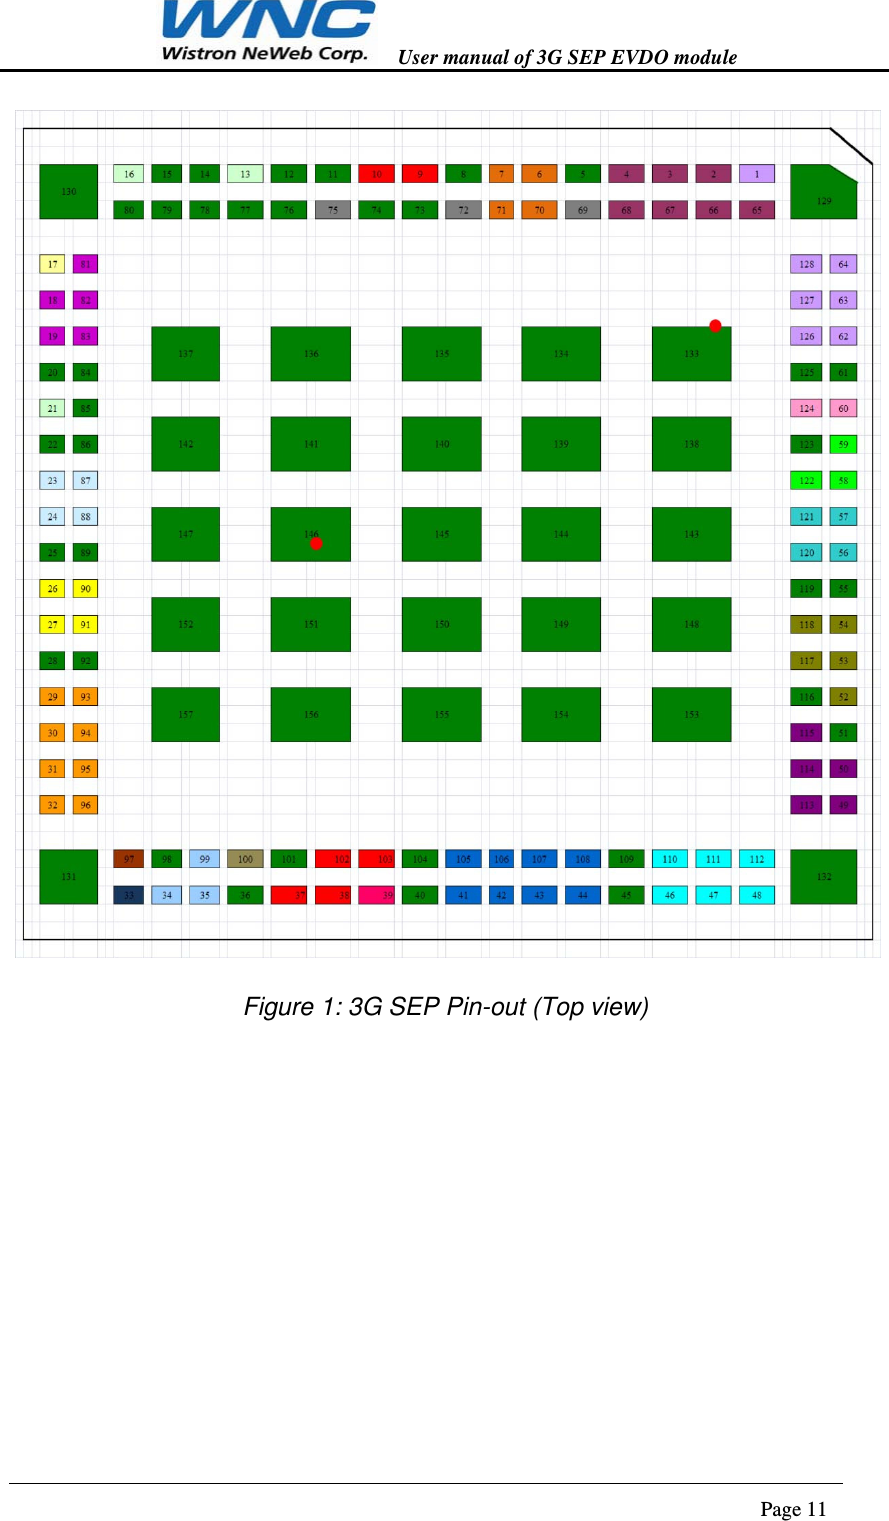   User manual of 3G SEP EVDO module                                                                      Page 11   Figure 1: 3G SEP Pin-out (Top view)      